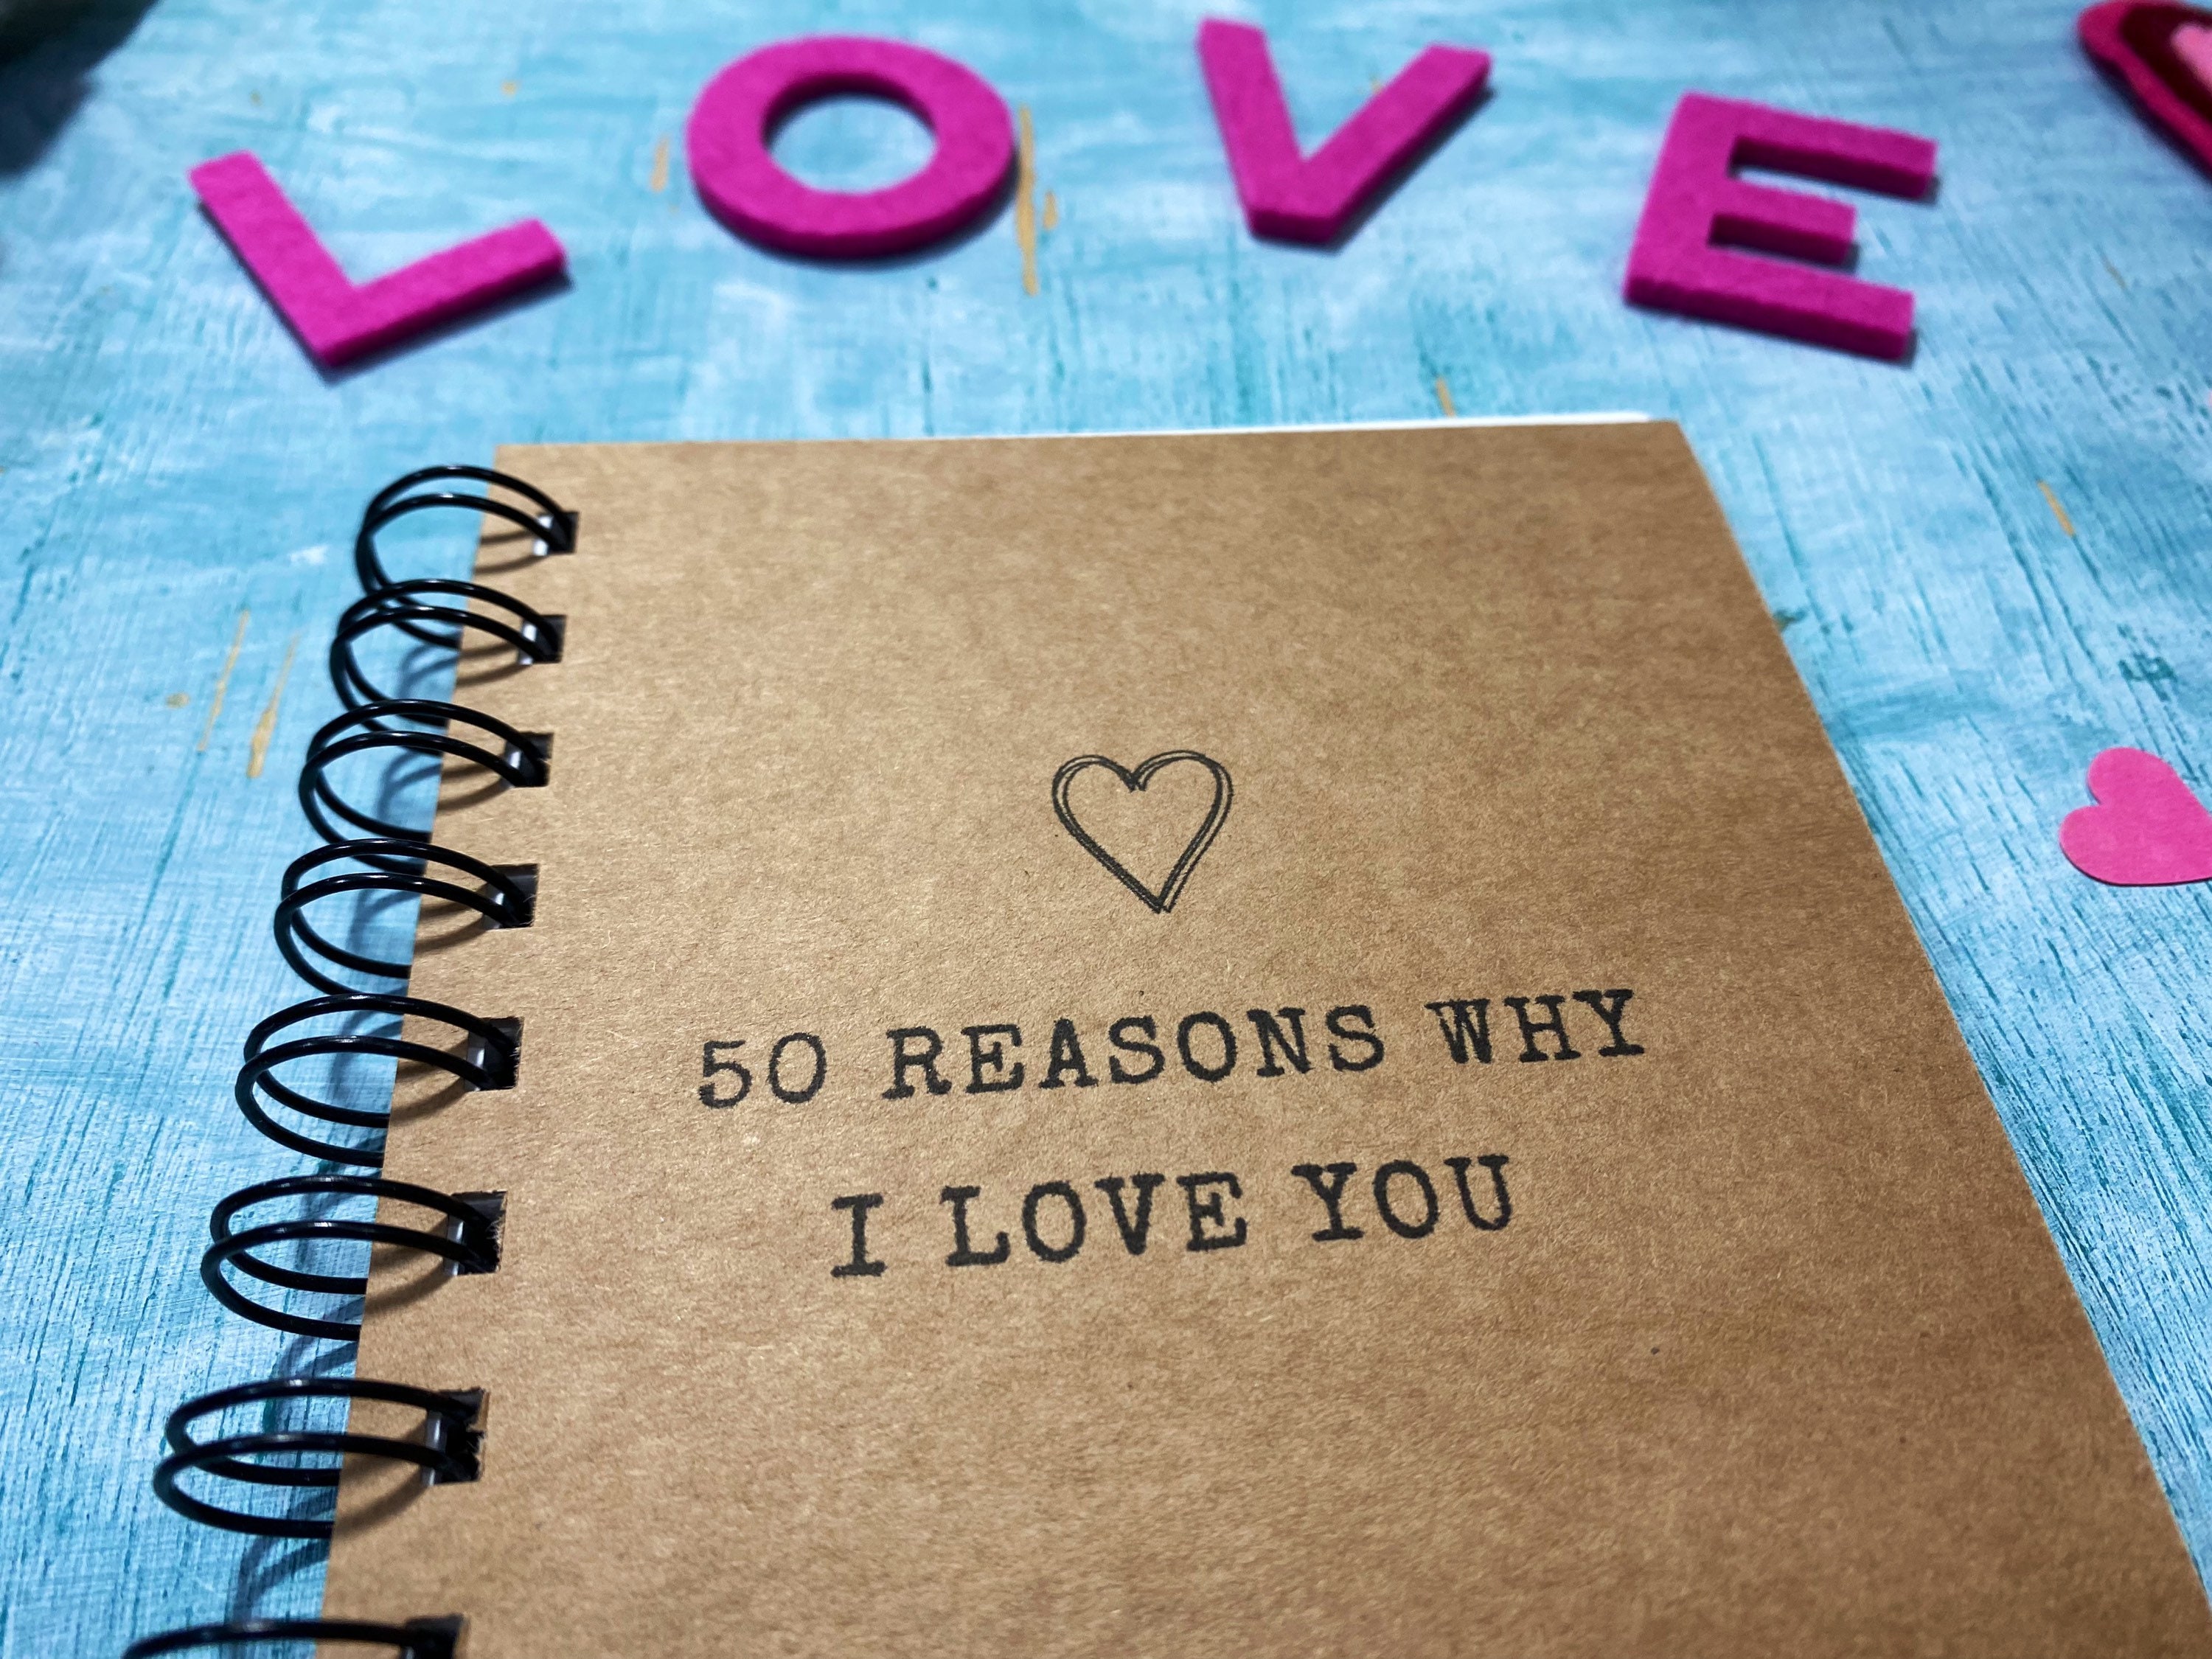 Reasons Why I Love You Scrapbook Journal, Boyfriend Gift, Engagement Gift 